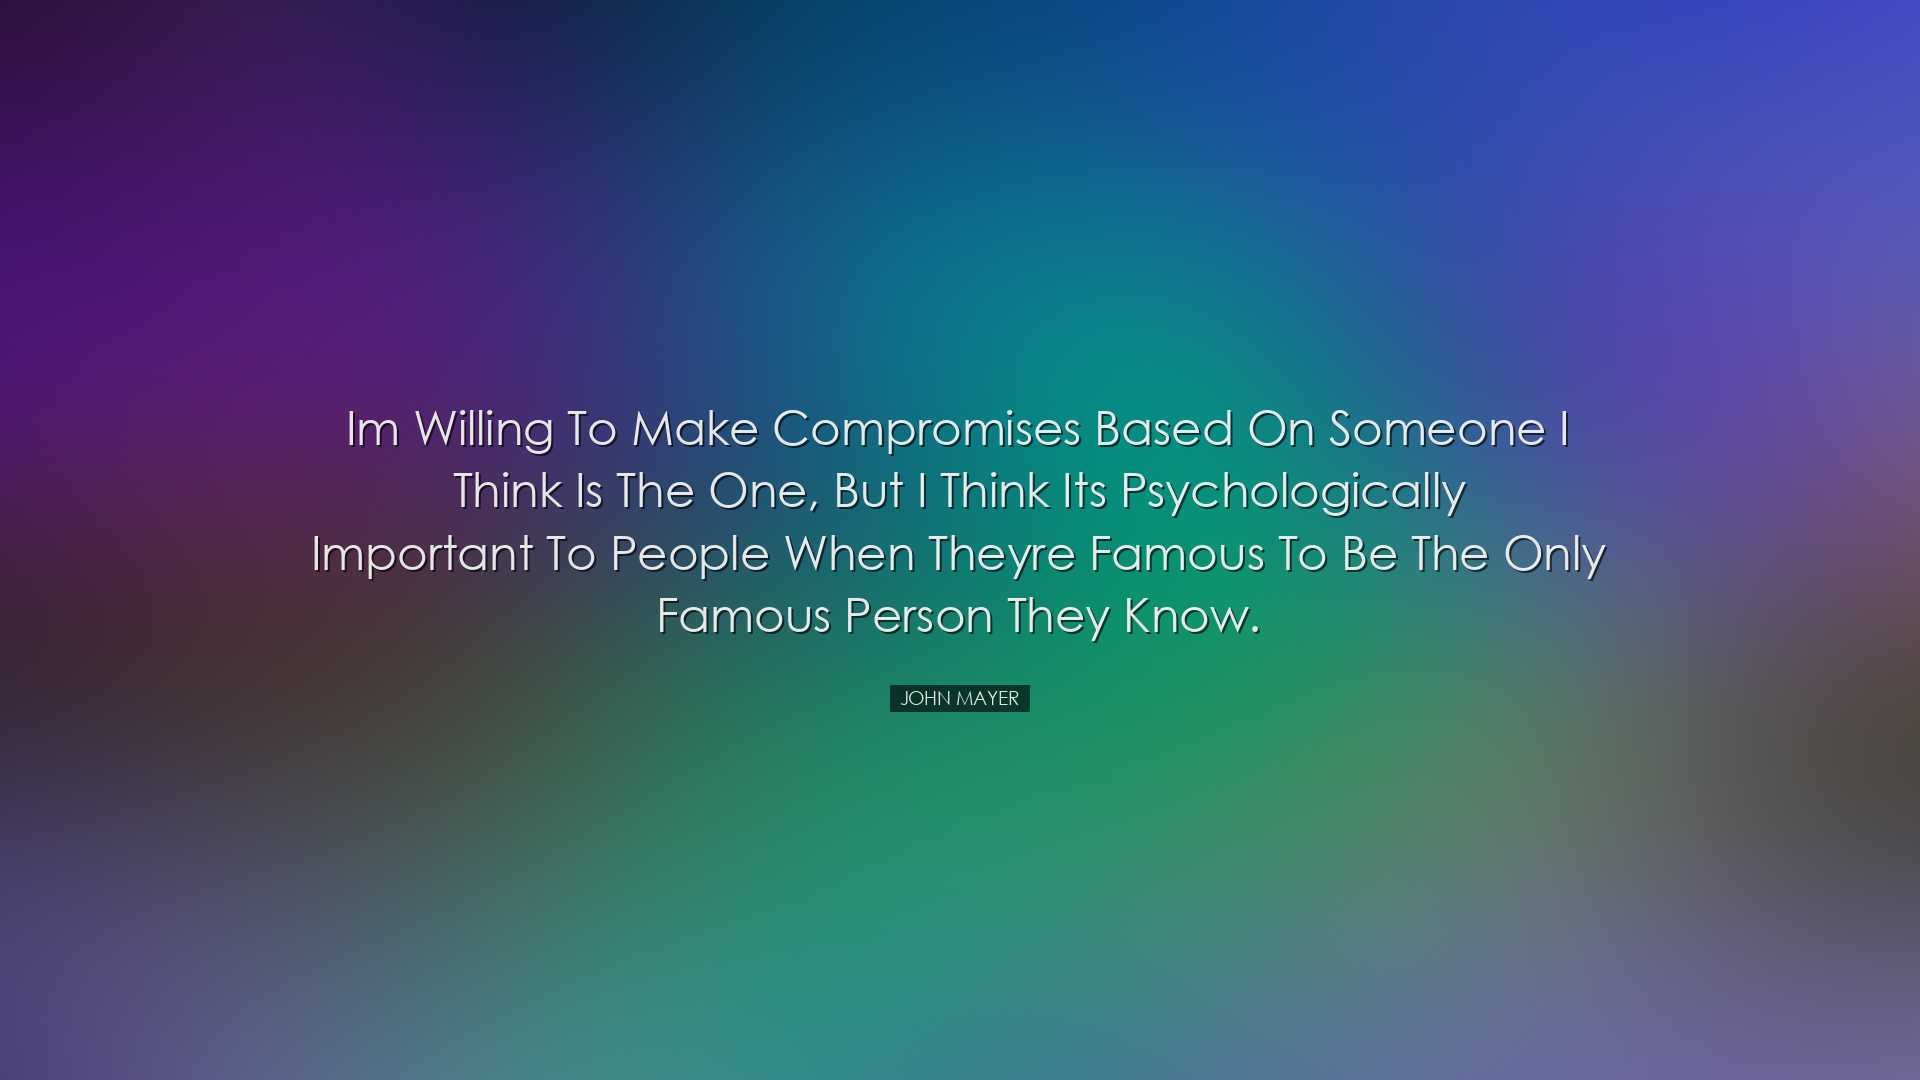 Im willing to make compromises based on someone I think is the one